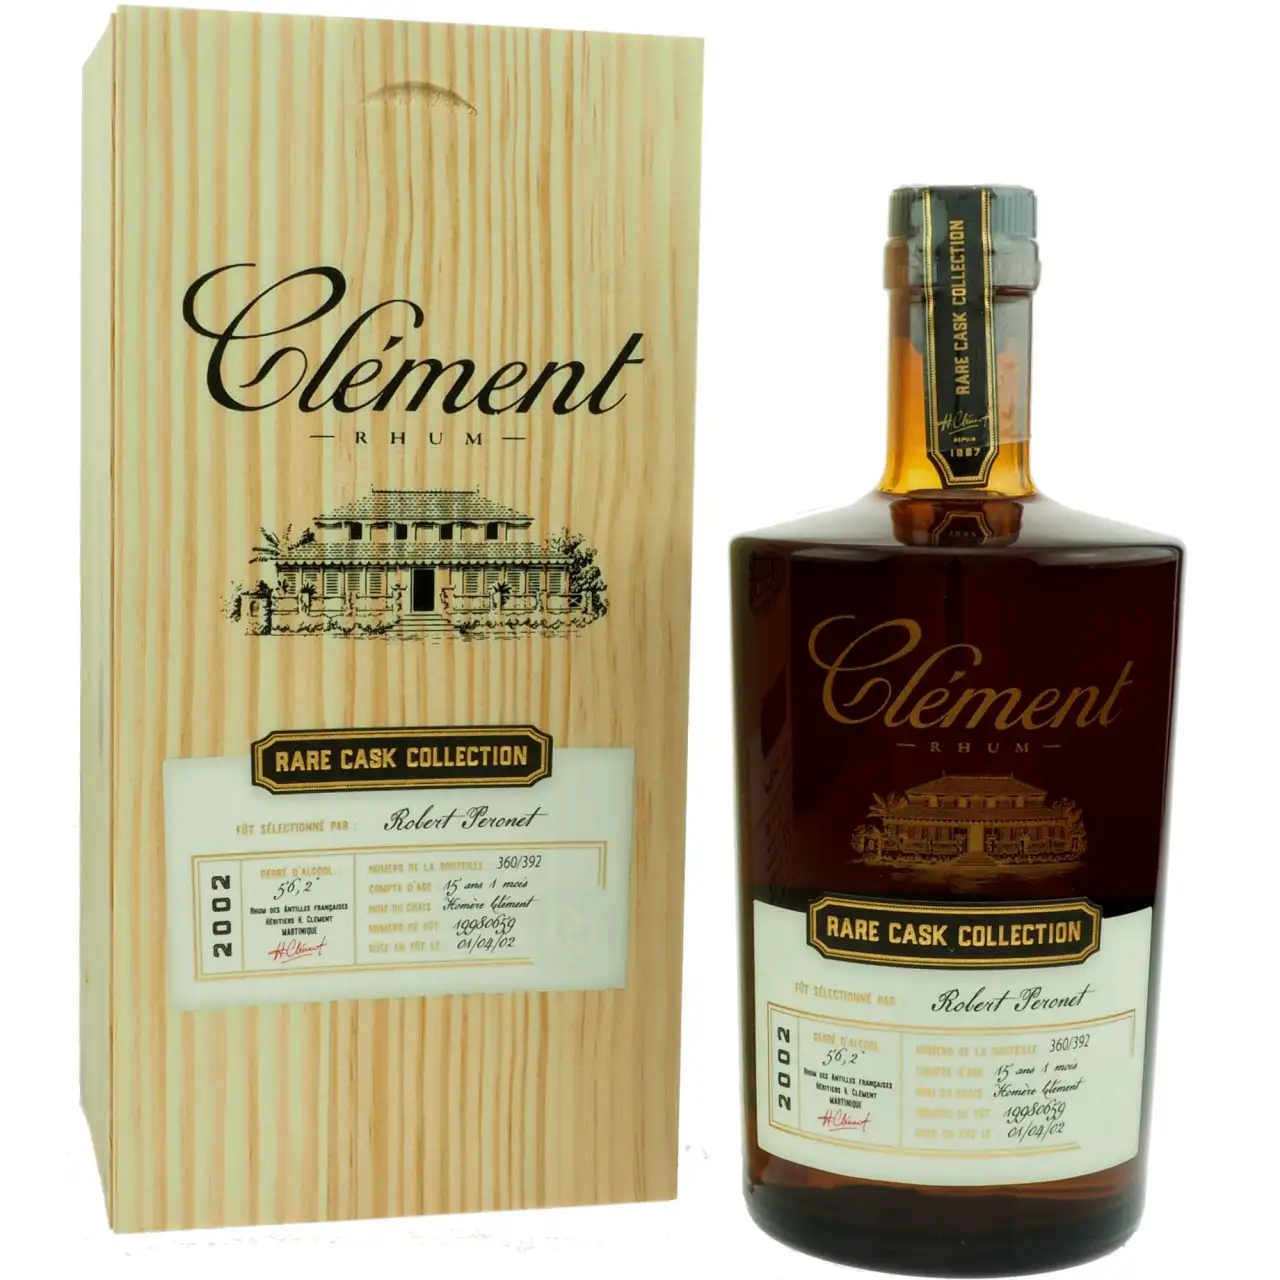 Image of the front of the bottle of the rum Clément Rare Cask Collection